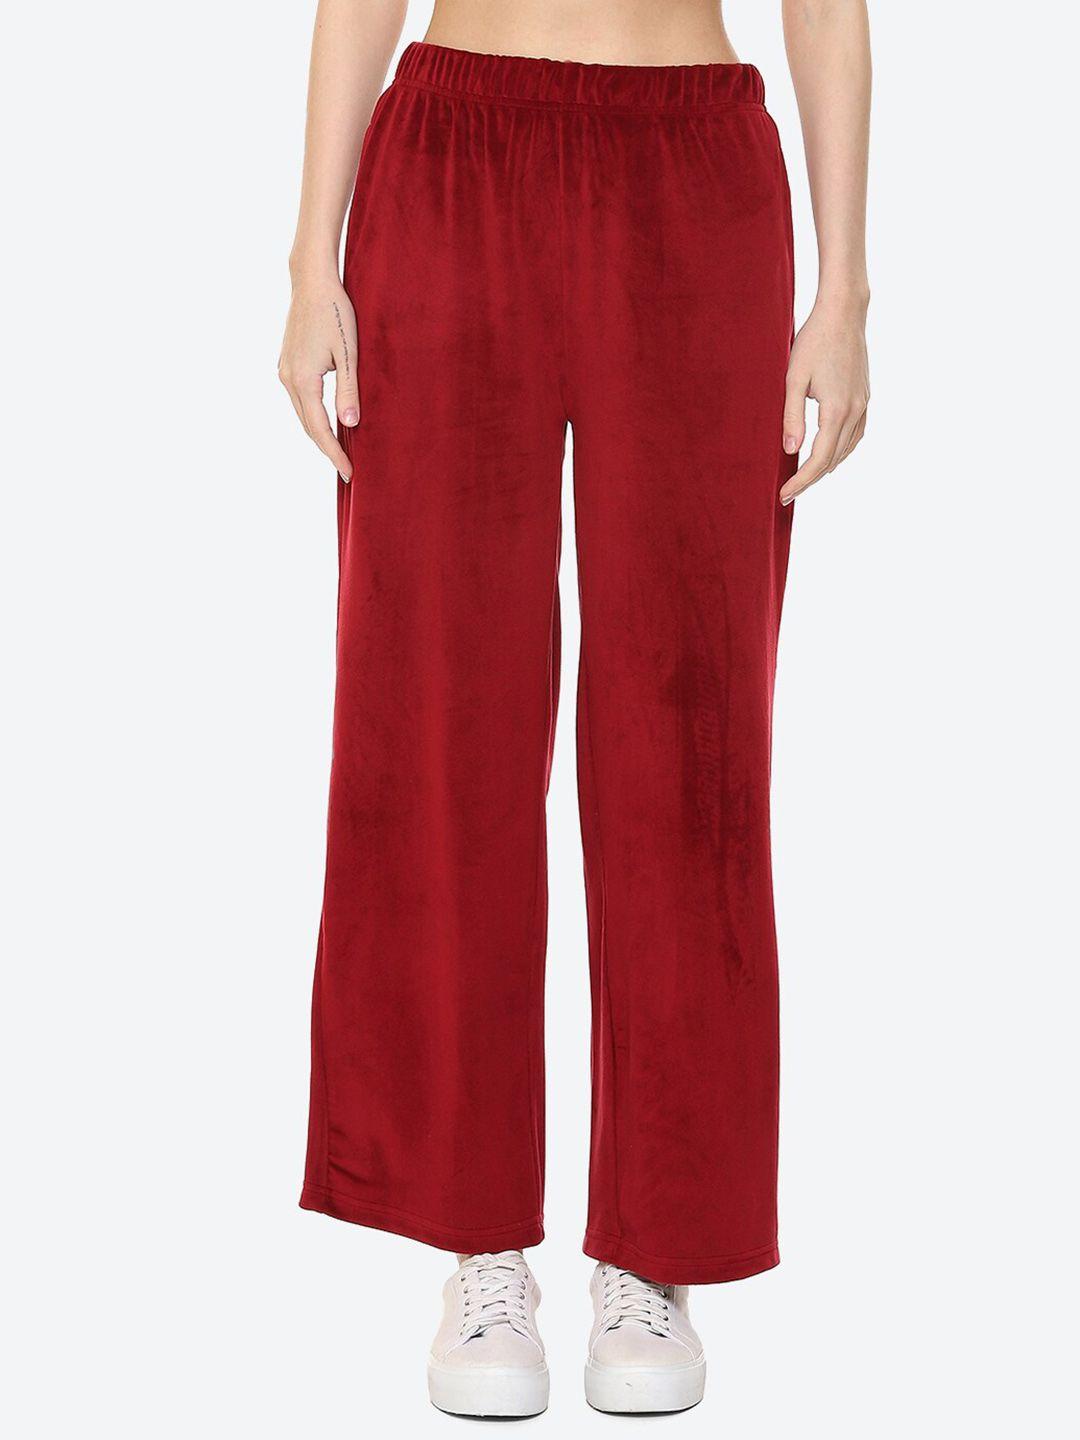 2bme women mid-rise straight-fit track pants